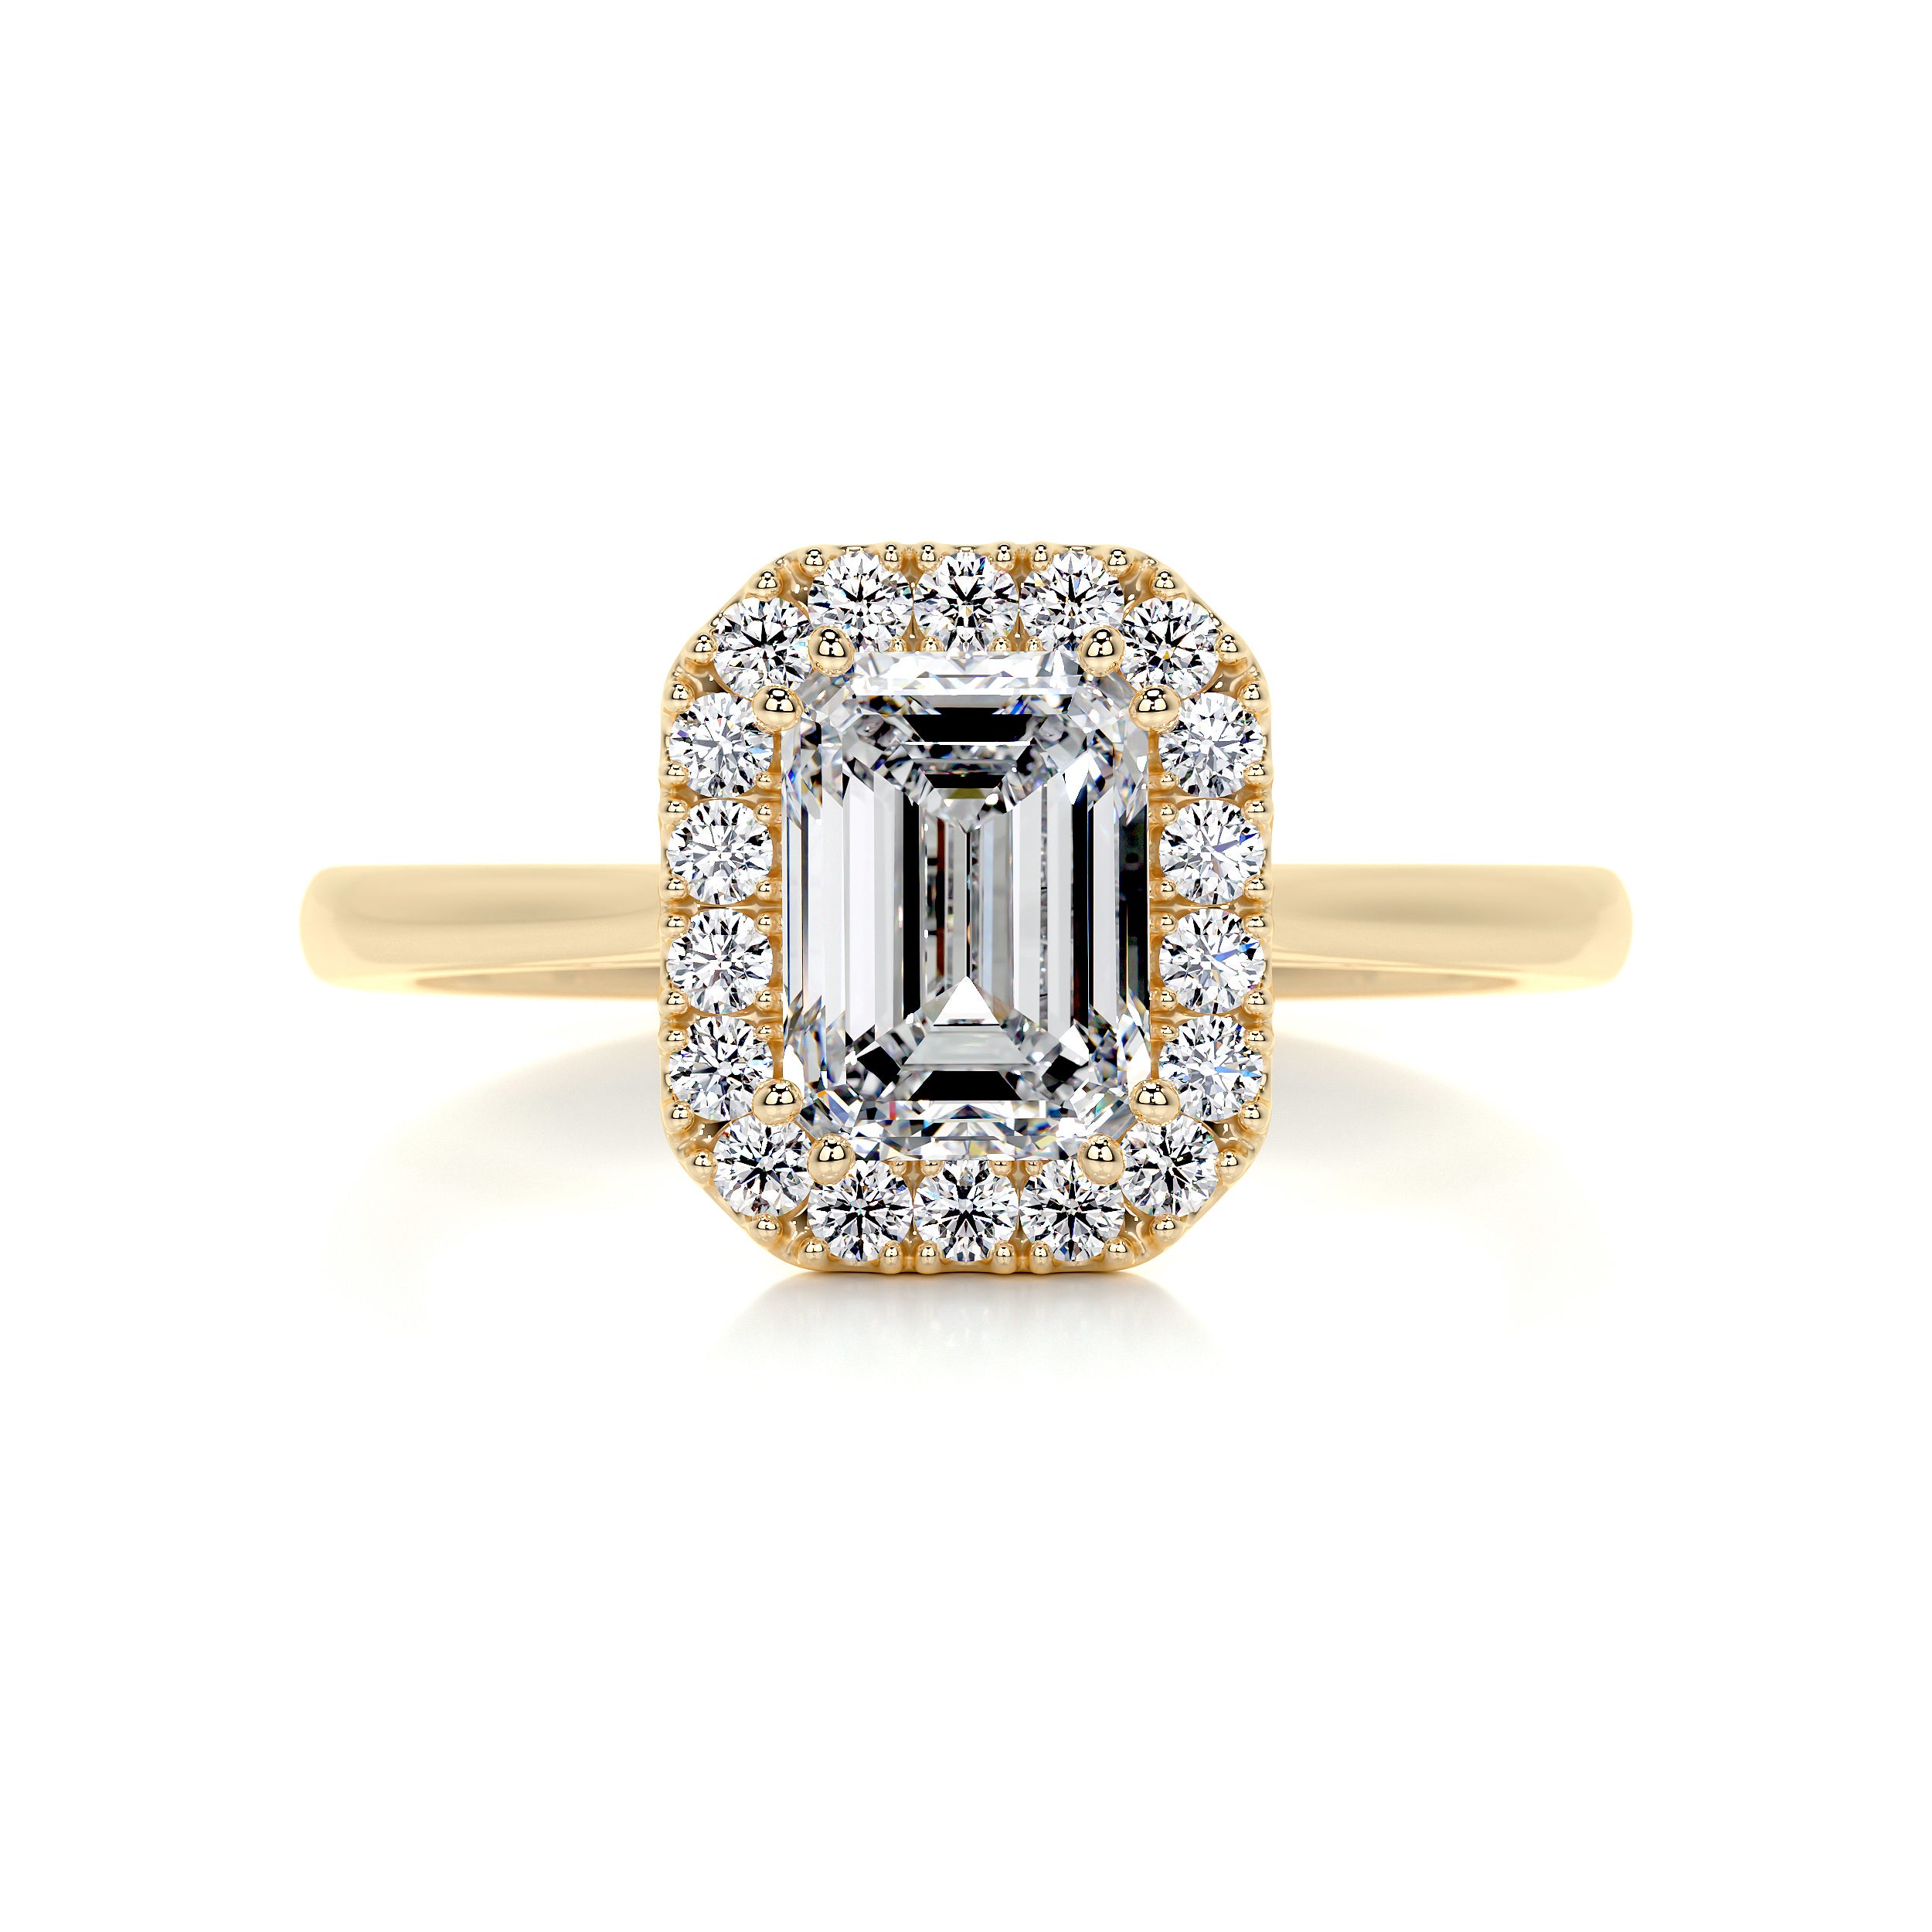 Lot - 18K gold diamond mounted ring. 3 central square cut stones